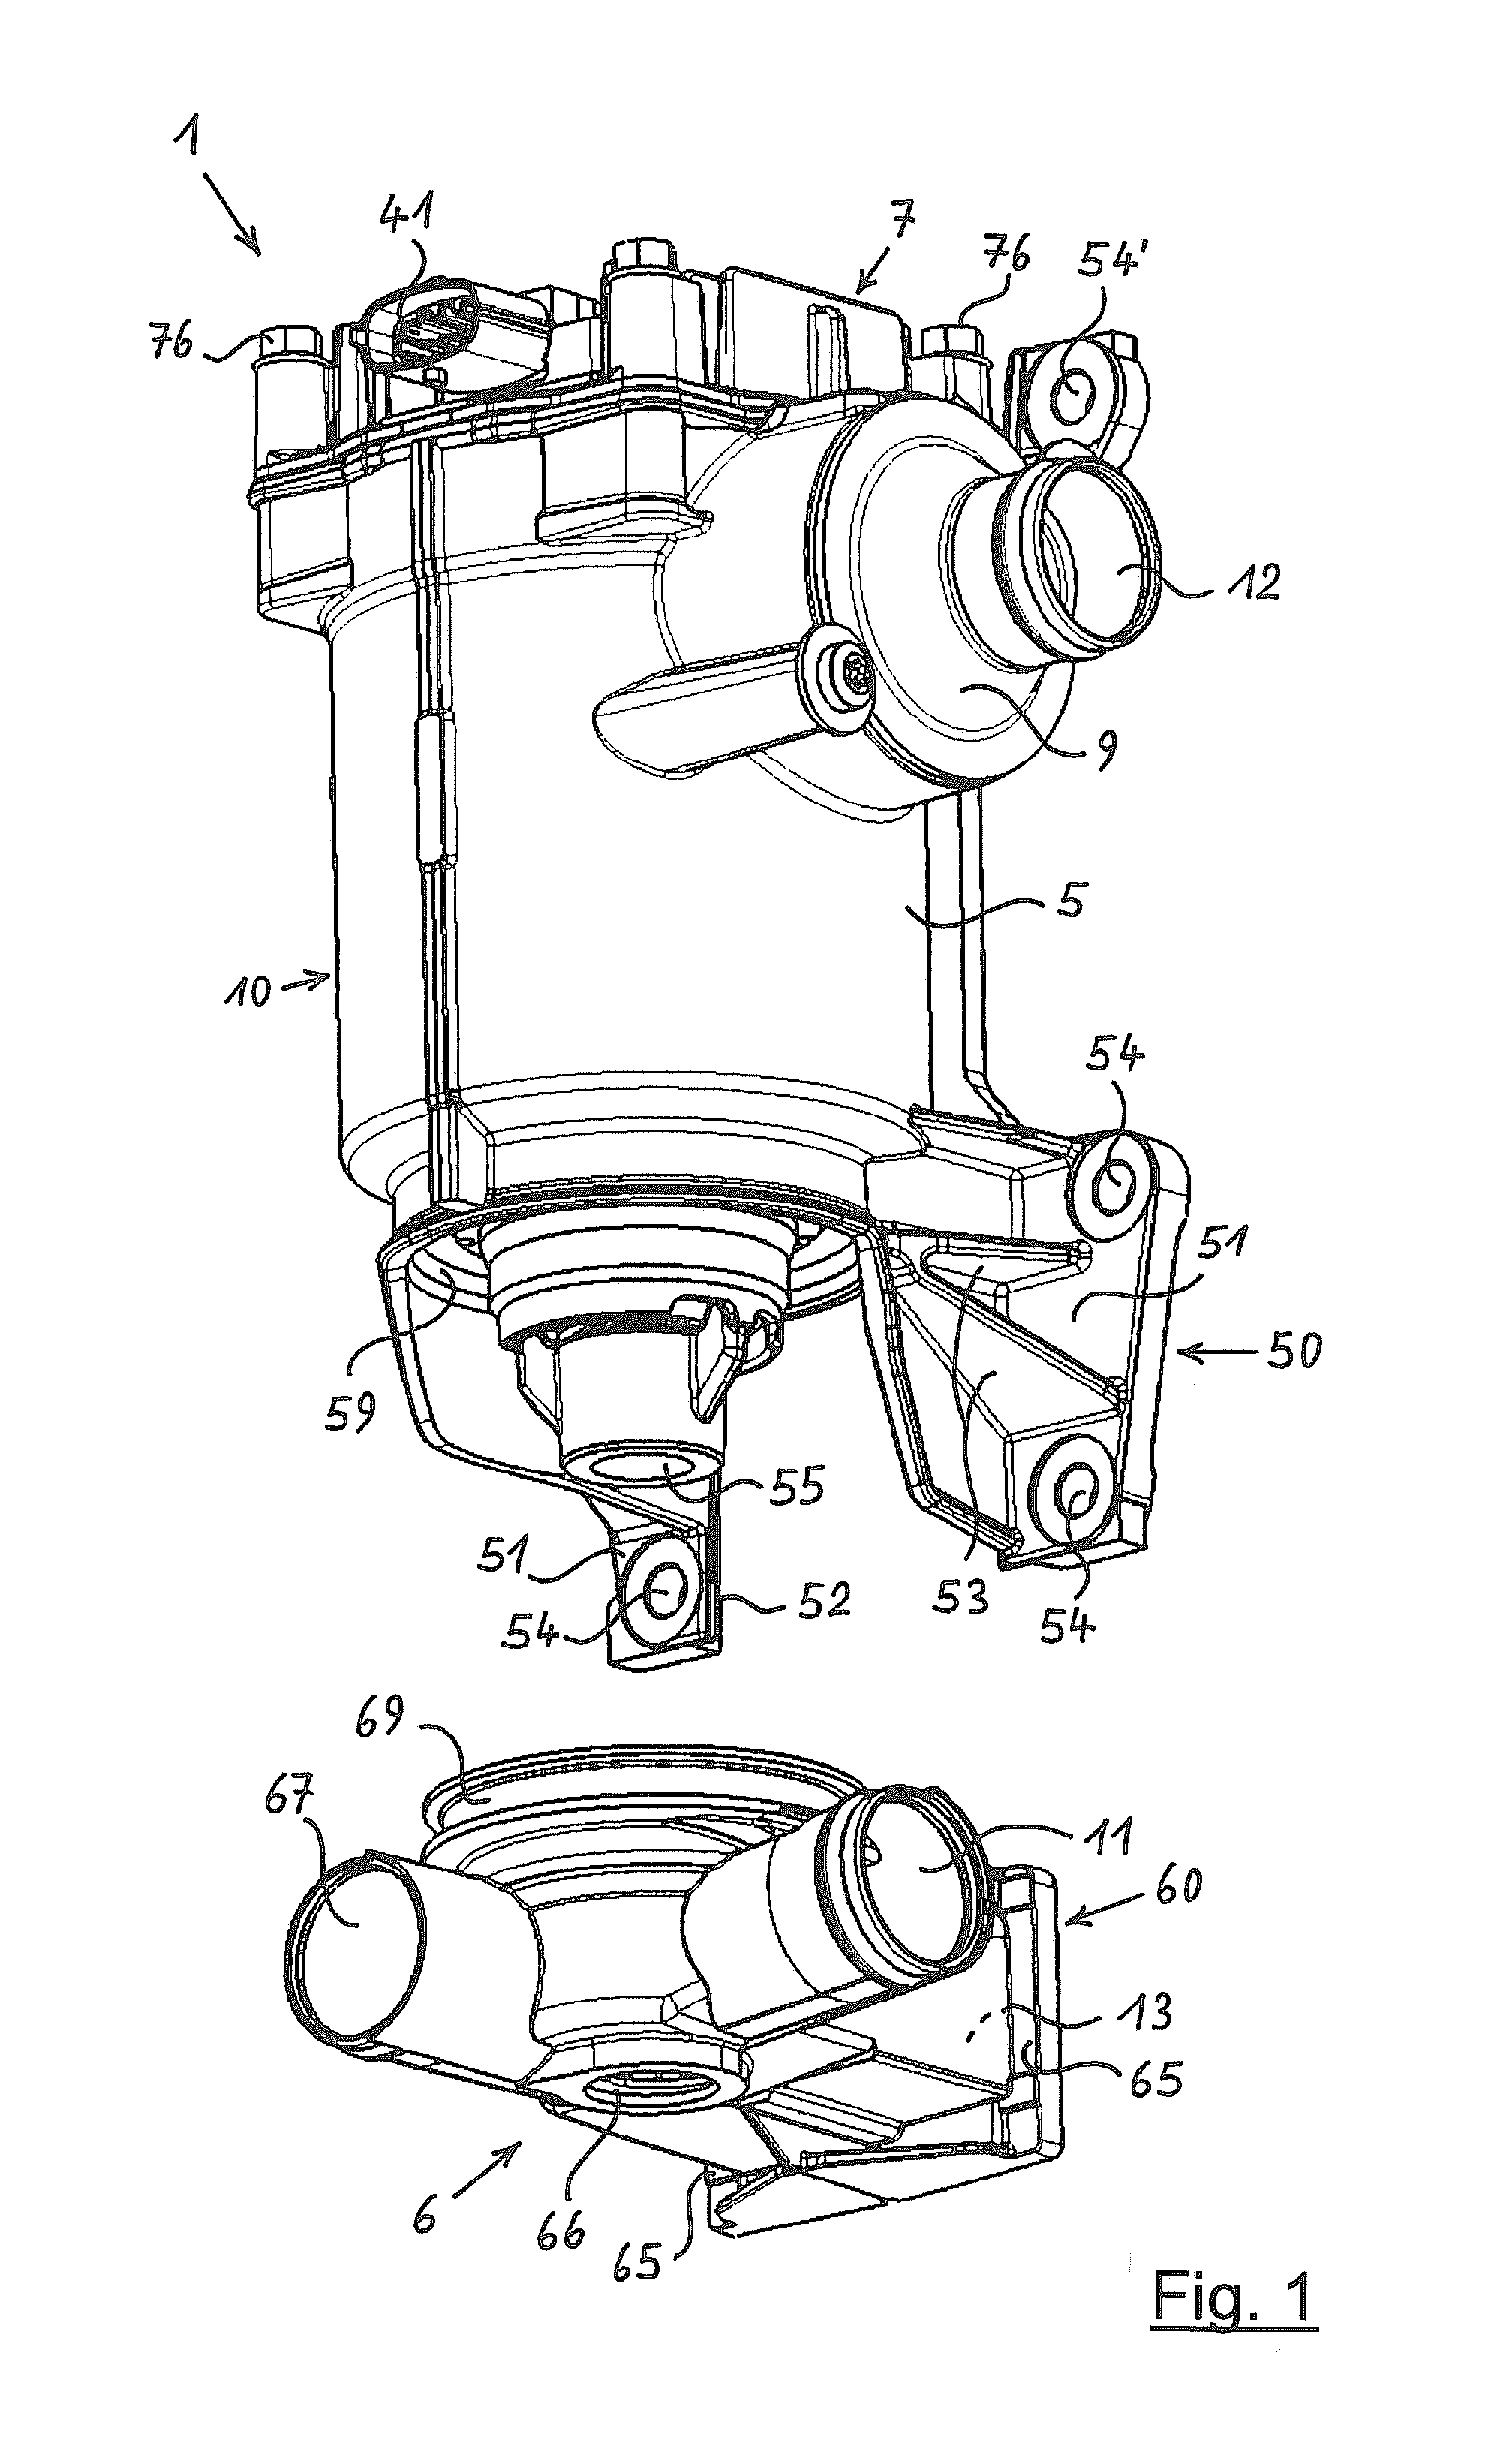 Centrifugal precipitator for precipitating oil mist from the crankcase ventilation gas from an internal combustion engine